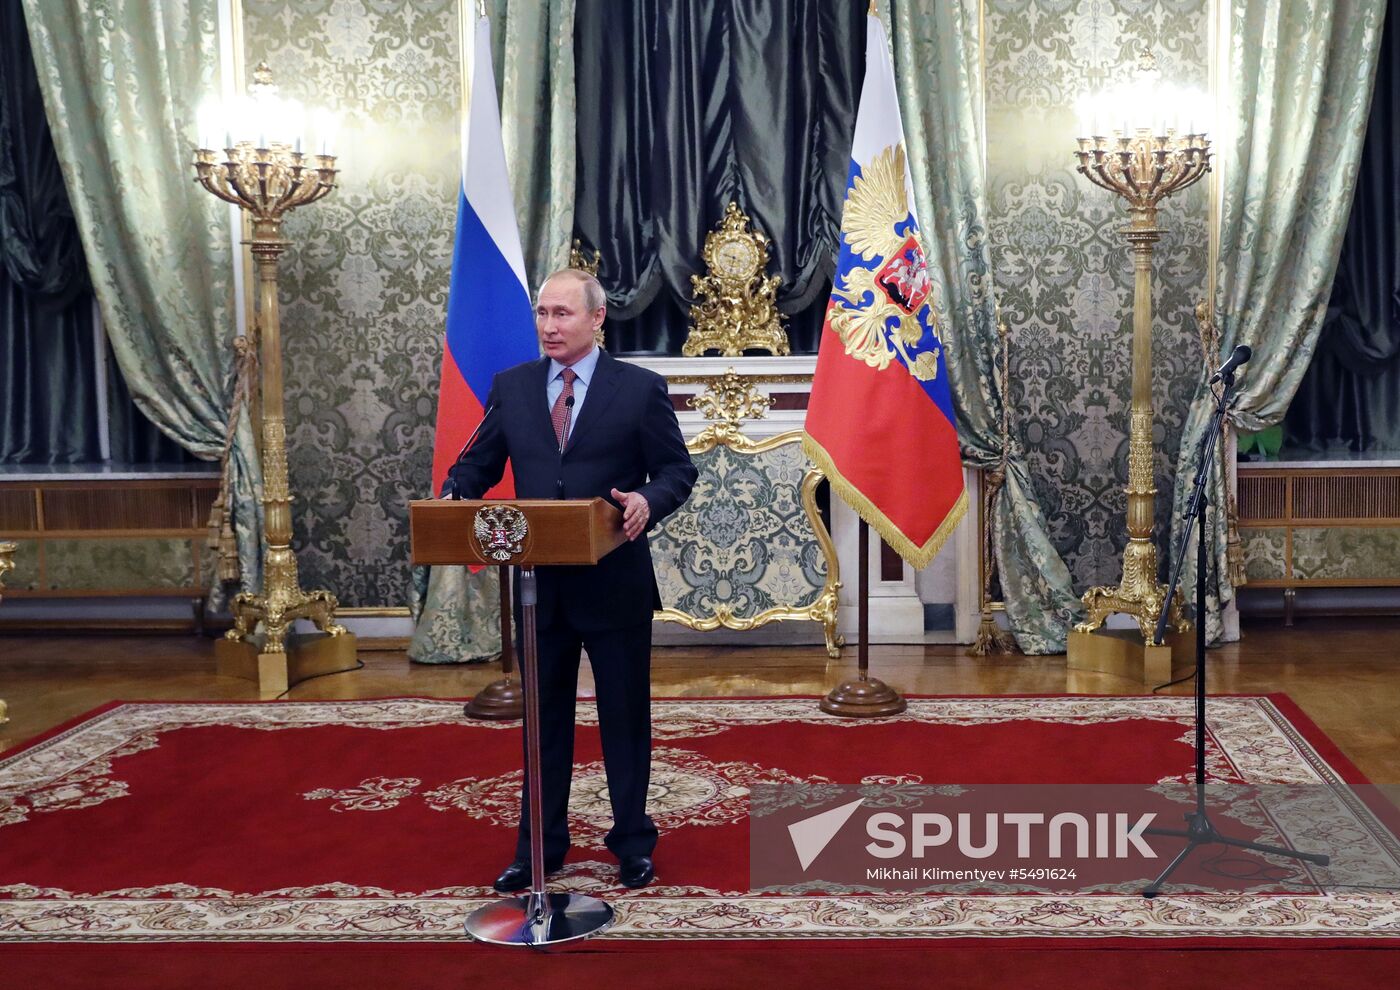 President Putin meets with government members in Kremlin